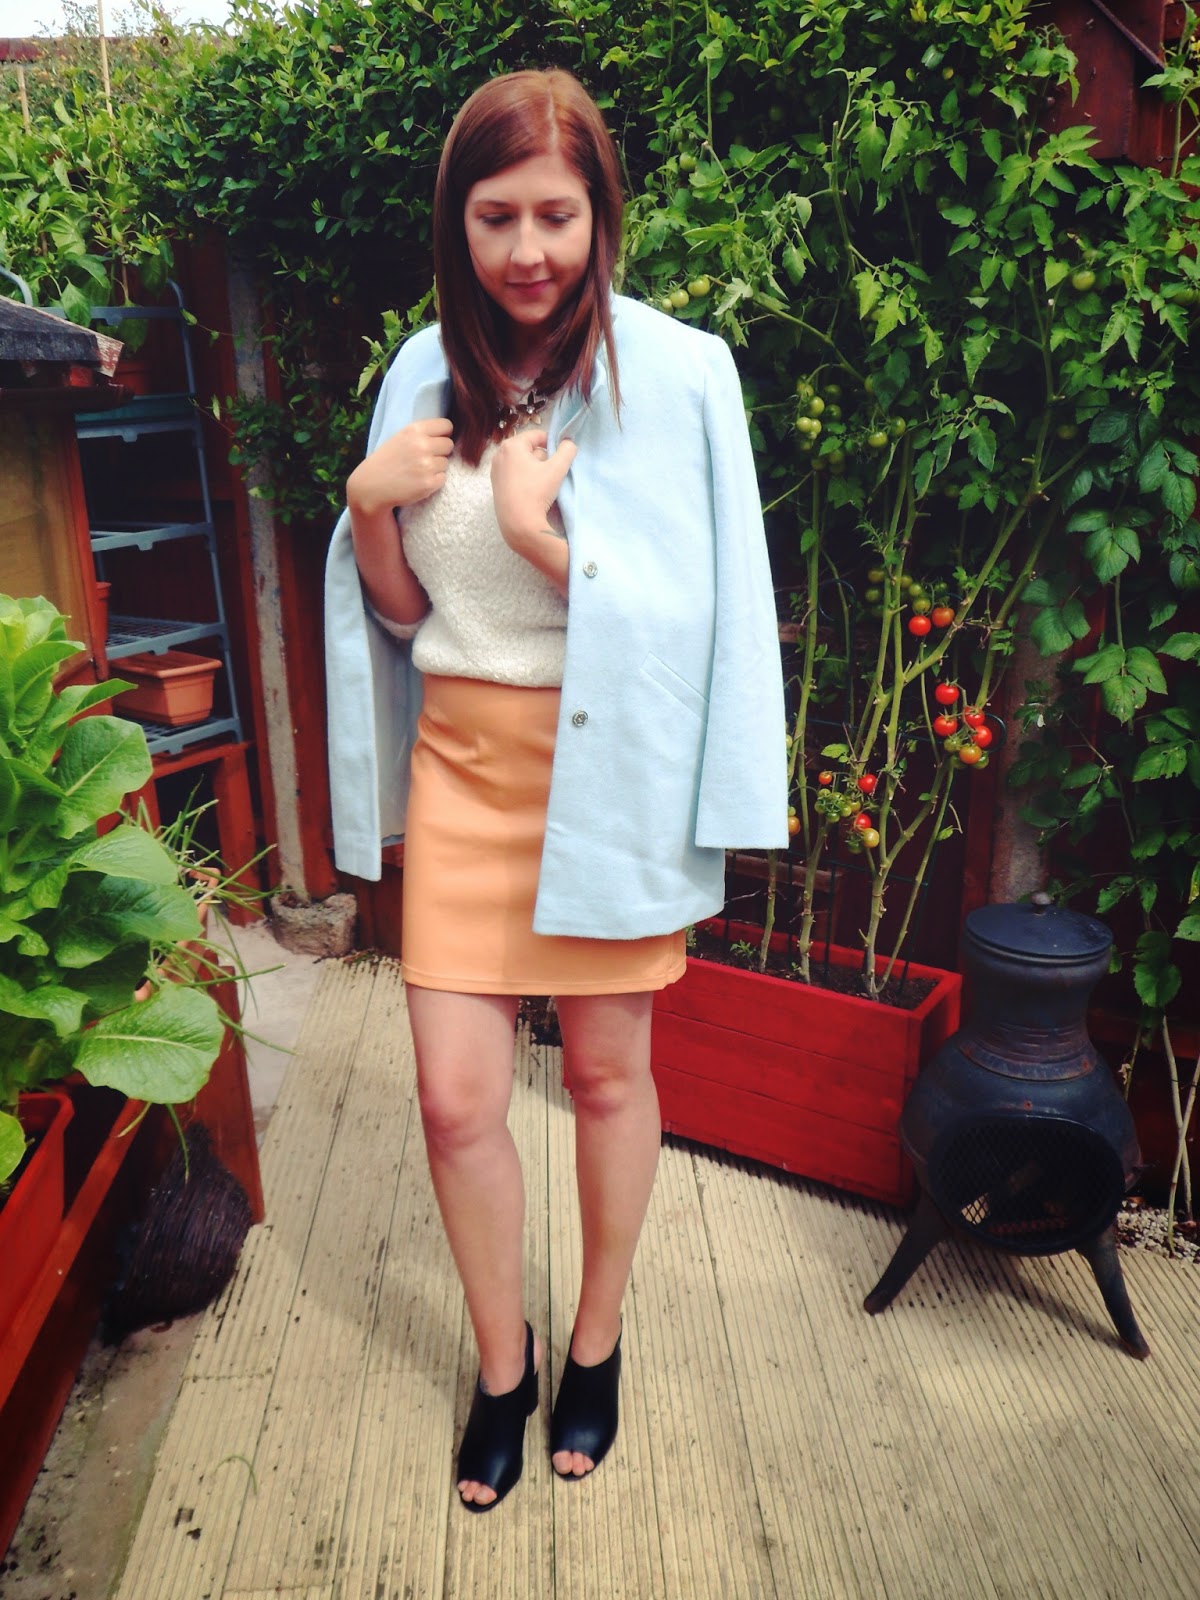 primark, autumn, winter, autumn/winter2014, ootd, Outfit of the Day, wiw, whatimwearing, whatibought, floral, necklace, shoppinghaul, fbloggers, fashionbloggers